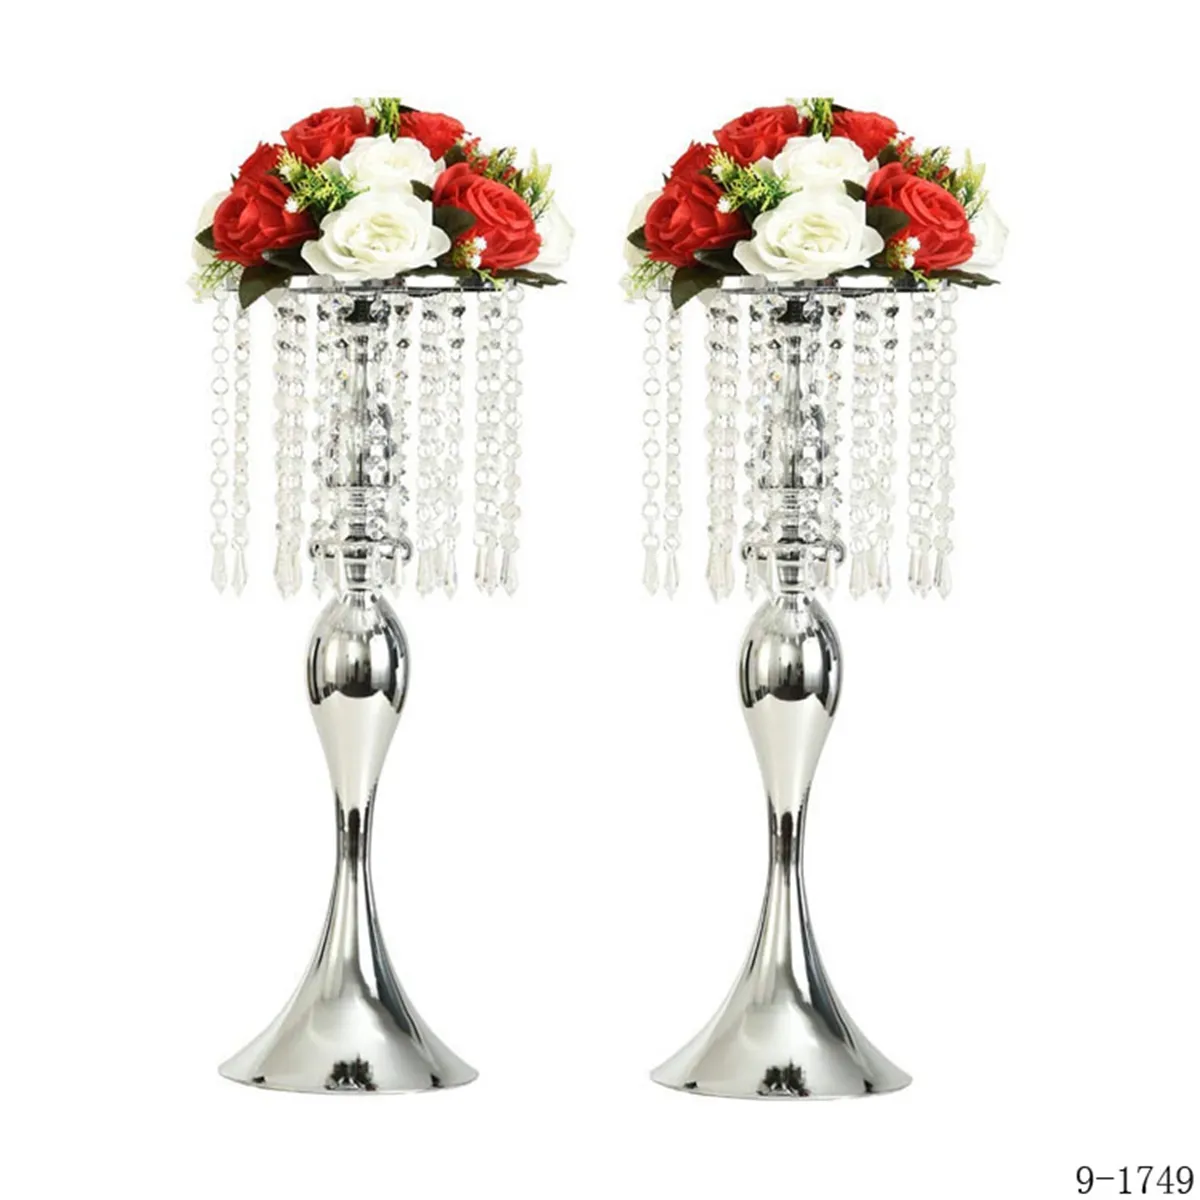 decoration Weddings Party Road Lead Flower Table Stand Crystal Gold Tables Wedding Centerpieces for Wedding Decor 070